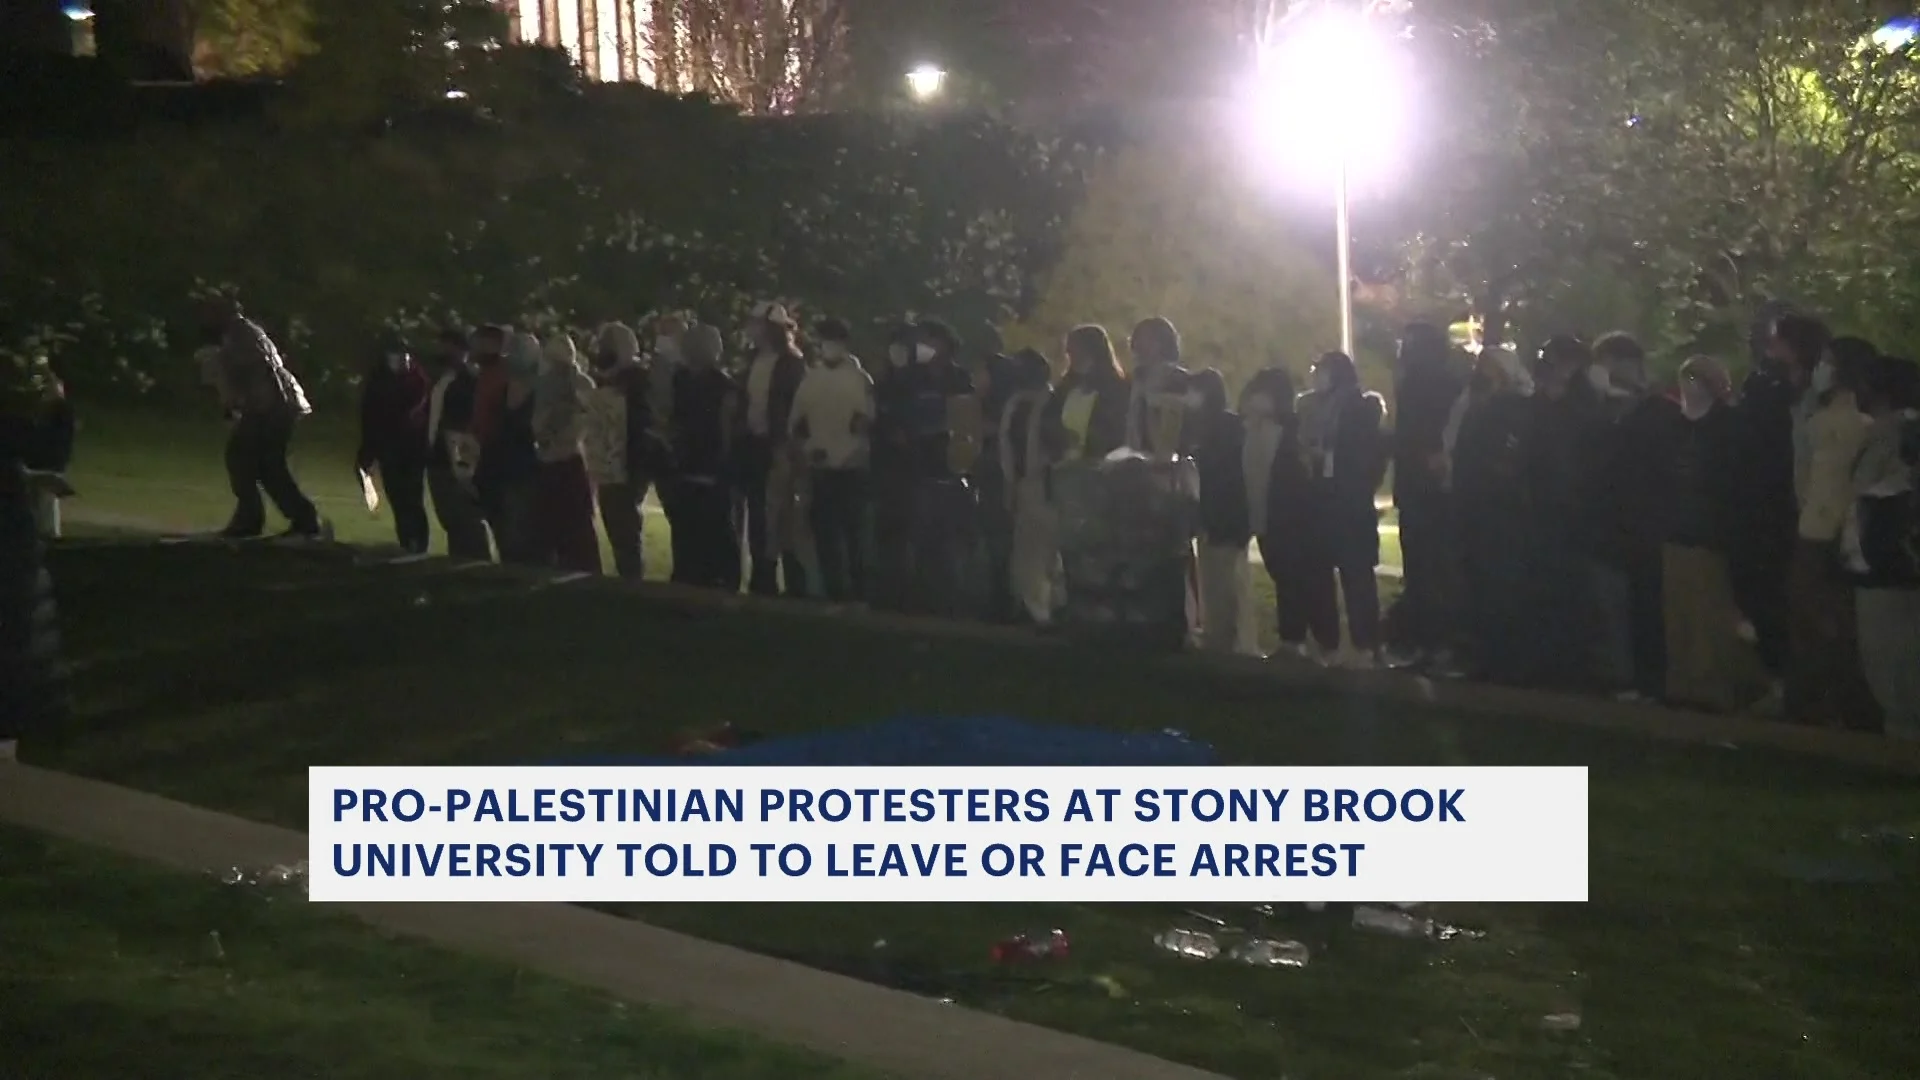 Pro-Palestinian protesters at Stony Brook University remain past deadline as some police leave